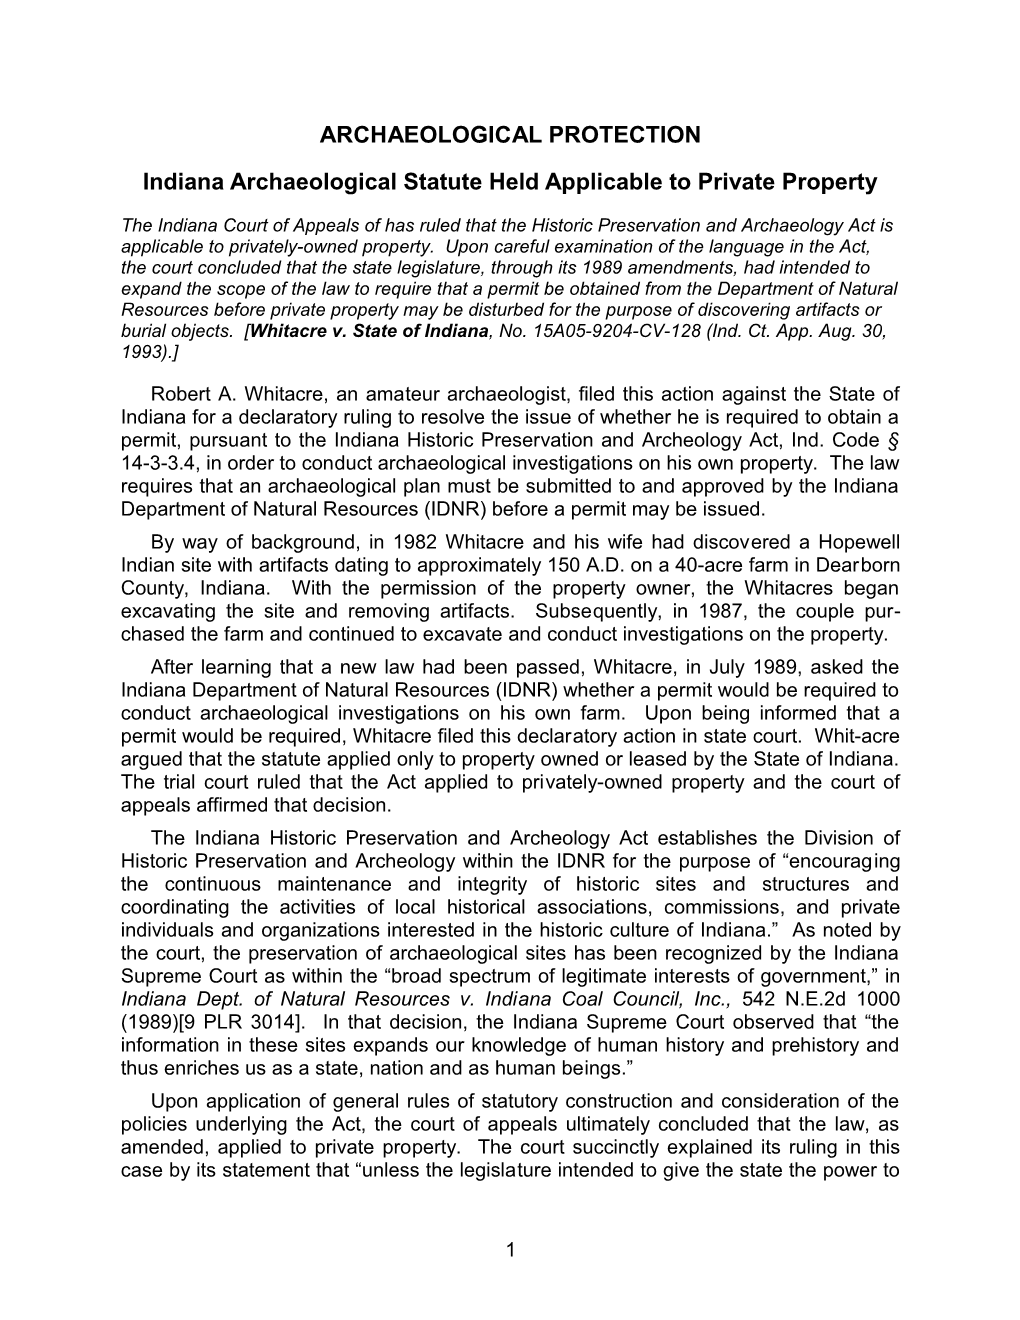 Indiana Archaeological Statute Held Applicable to Private Property